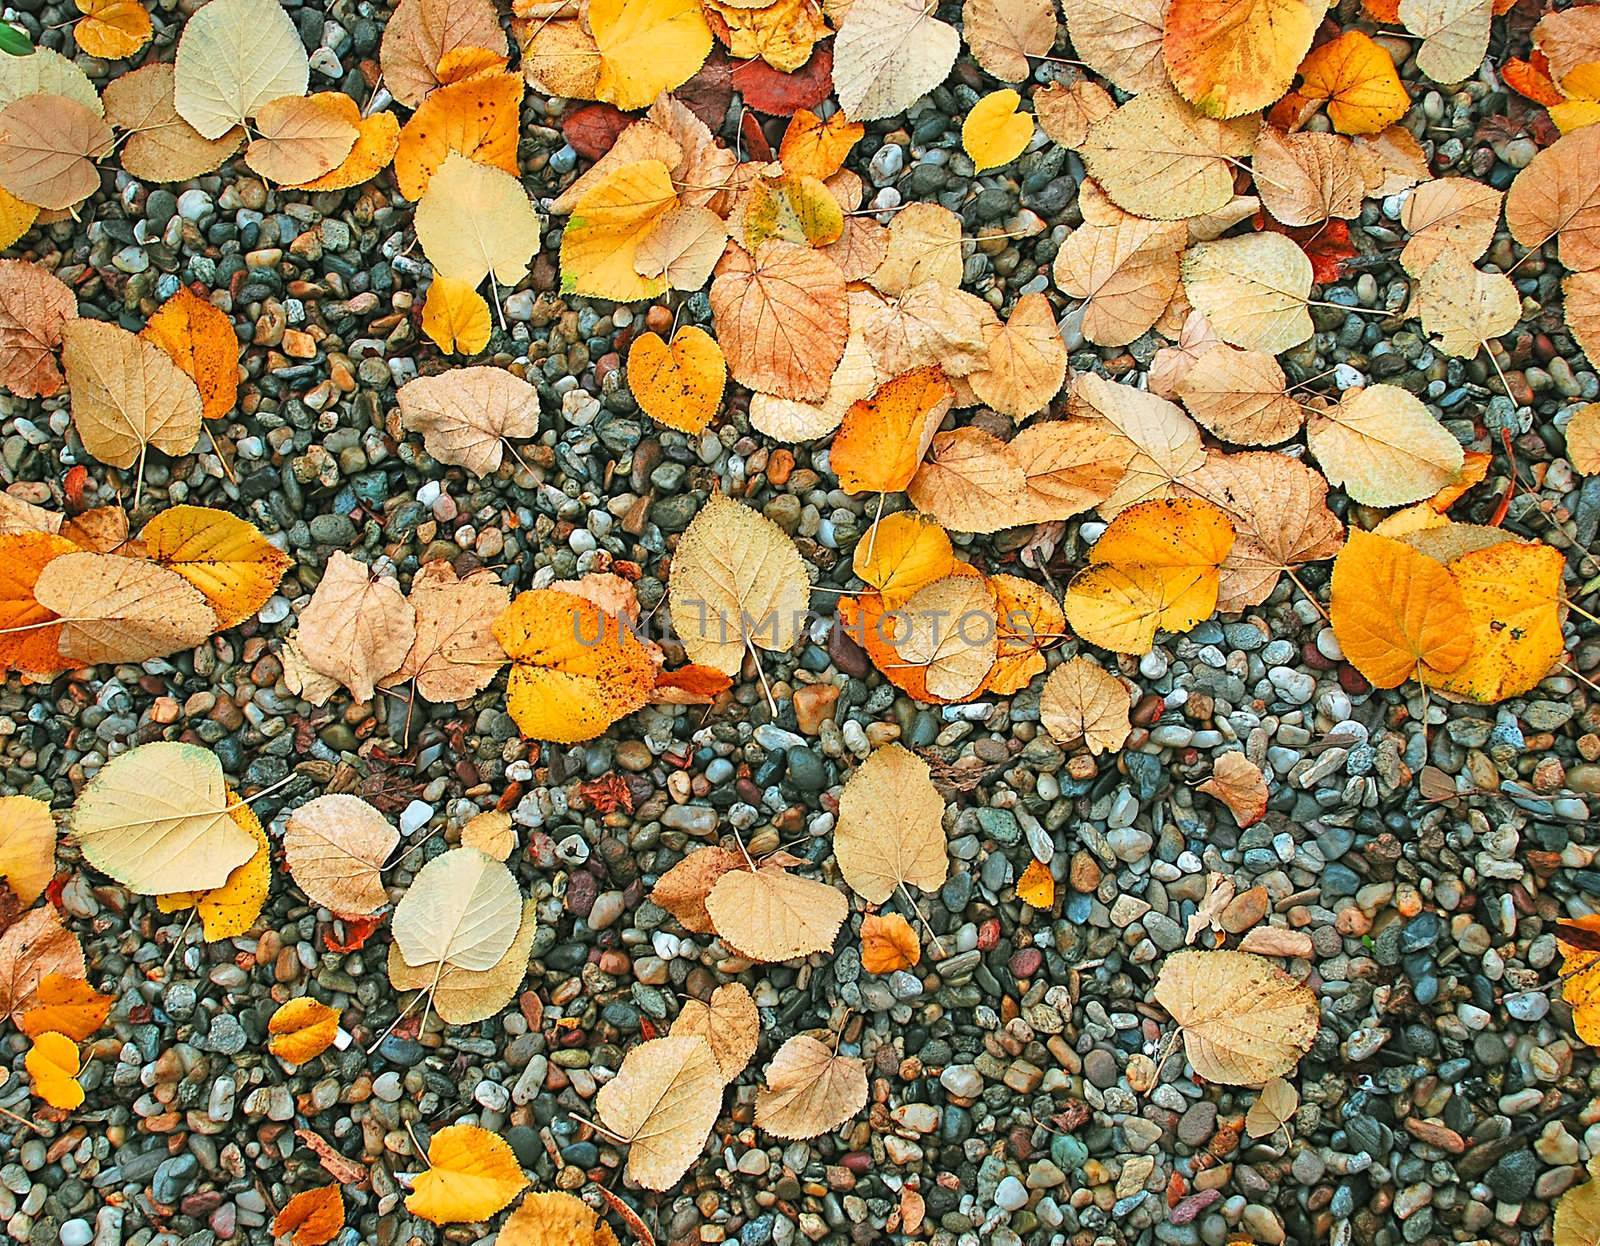 Autumn wet leaves background over rocks by simply